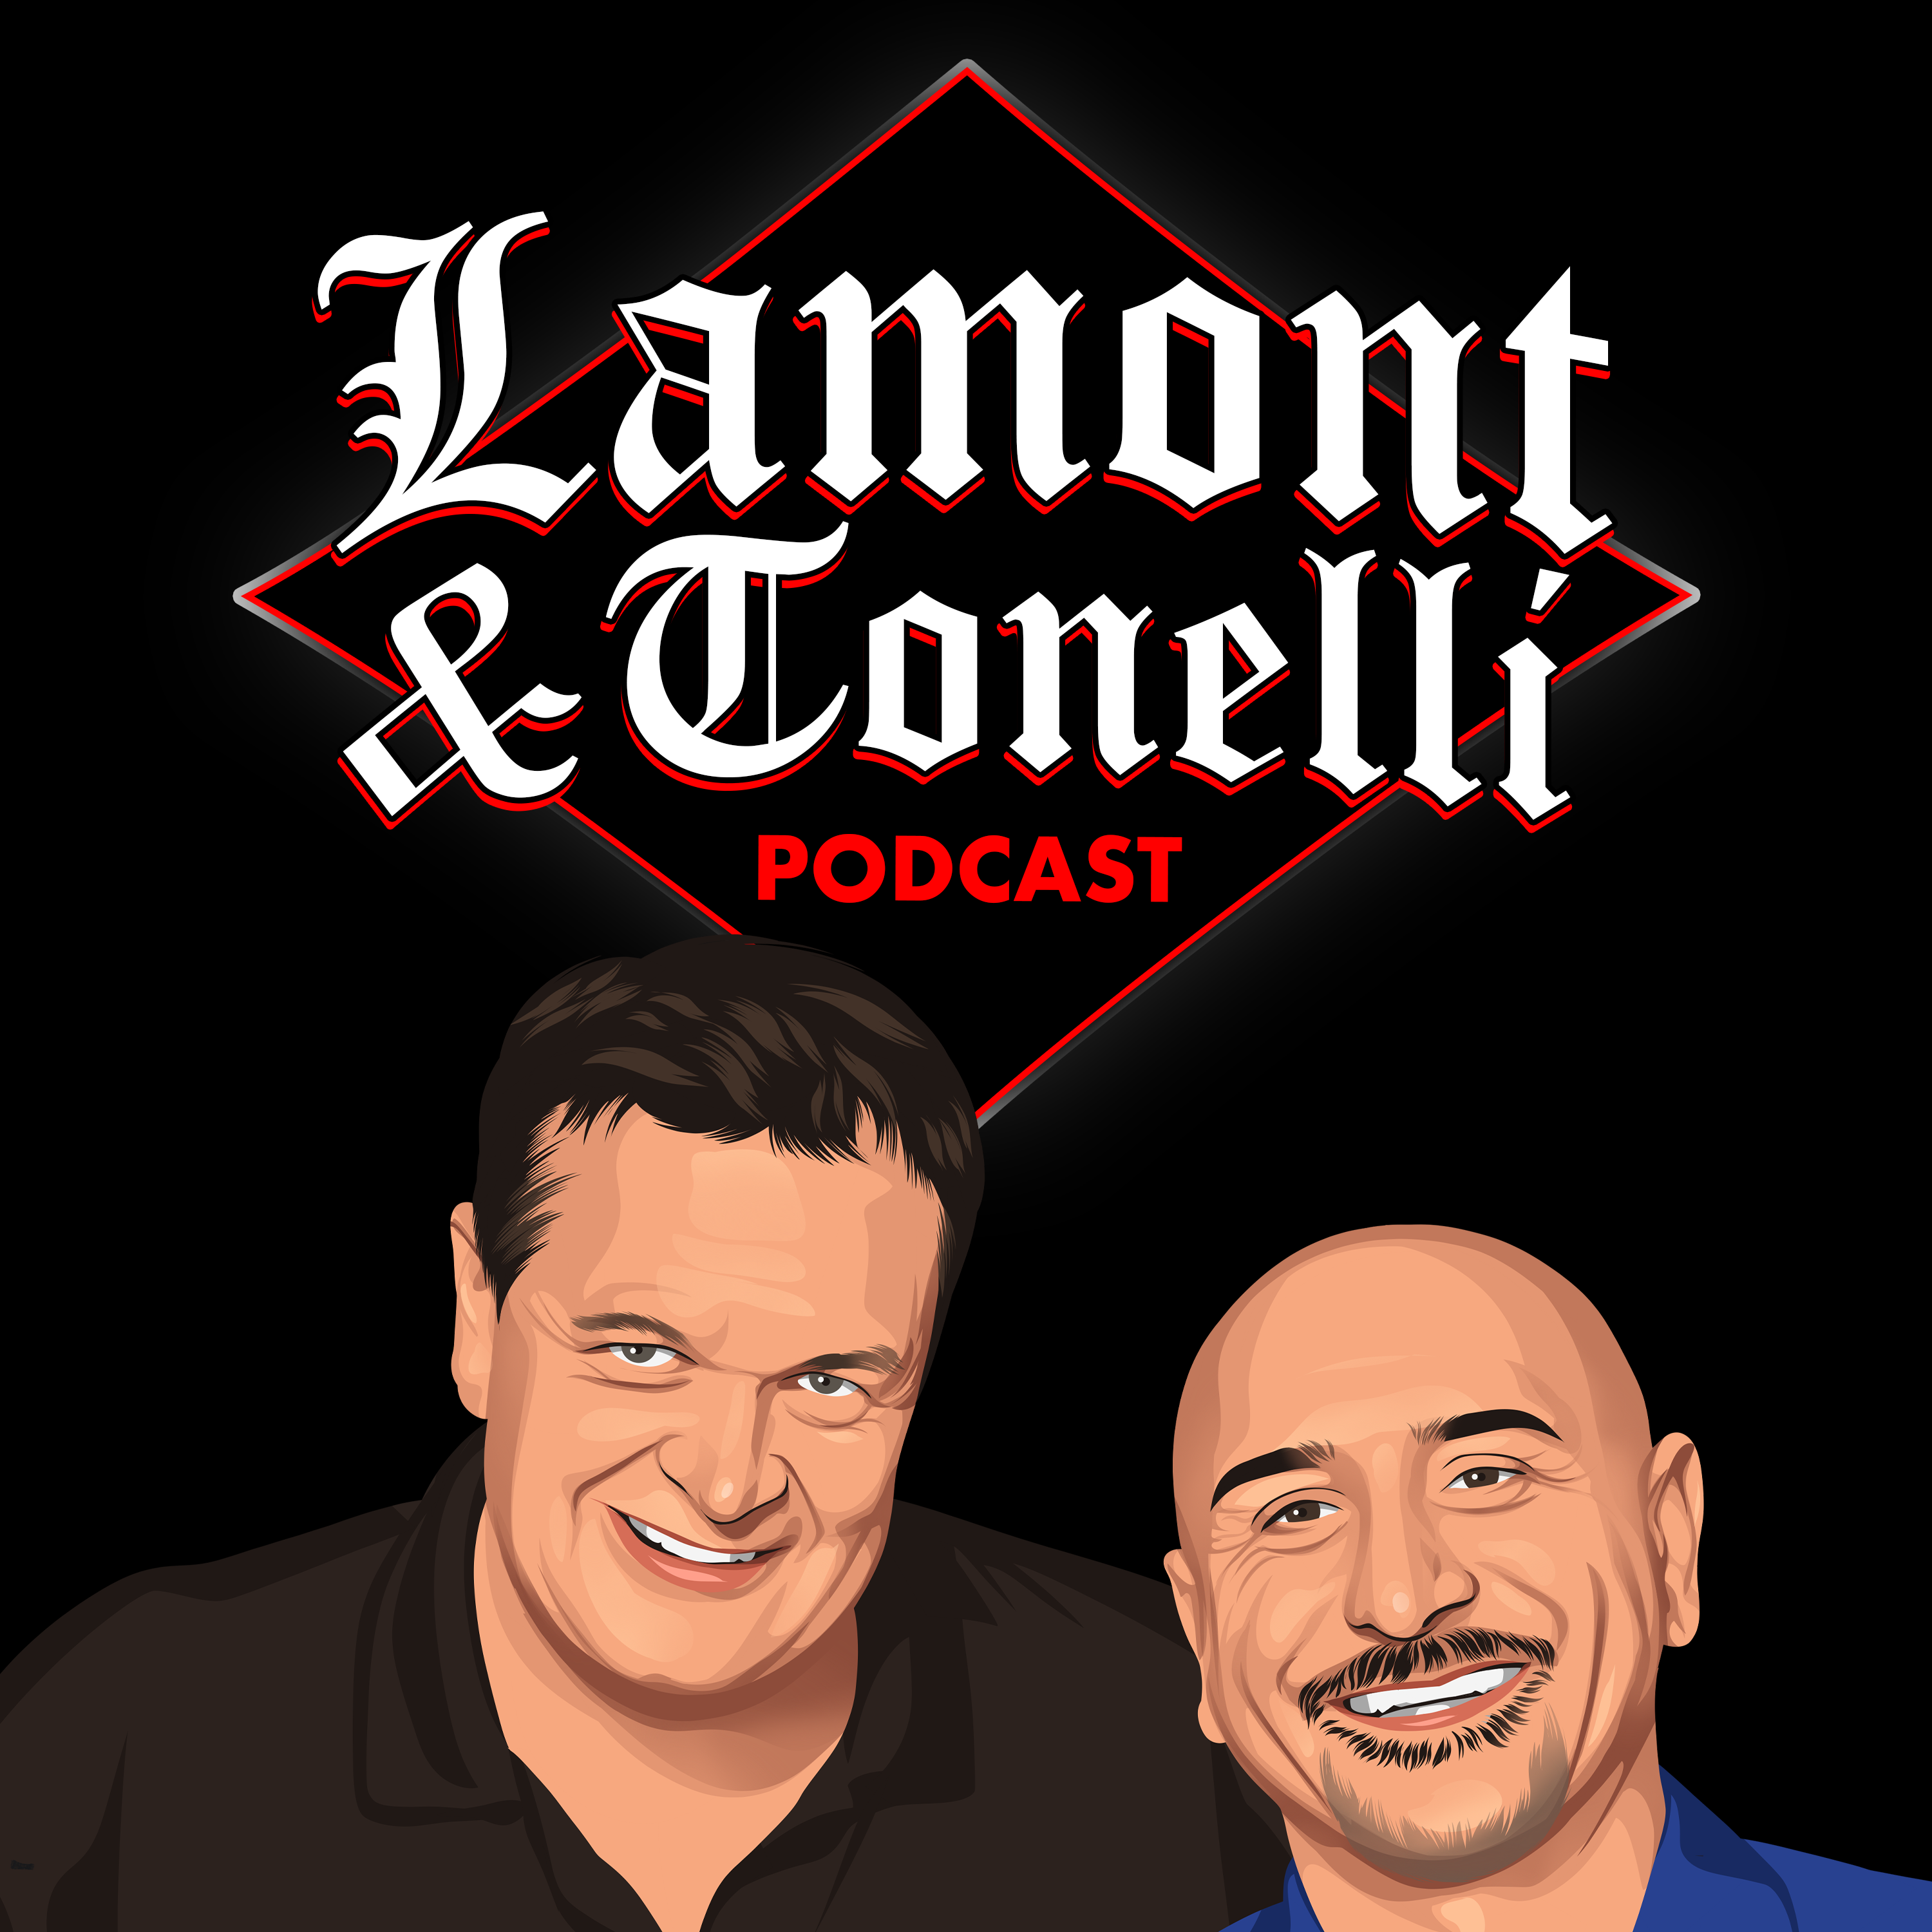 Lamont & Tonelli Check In With The Boneheads On The Lick Me Wall